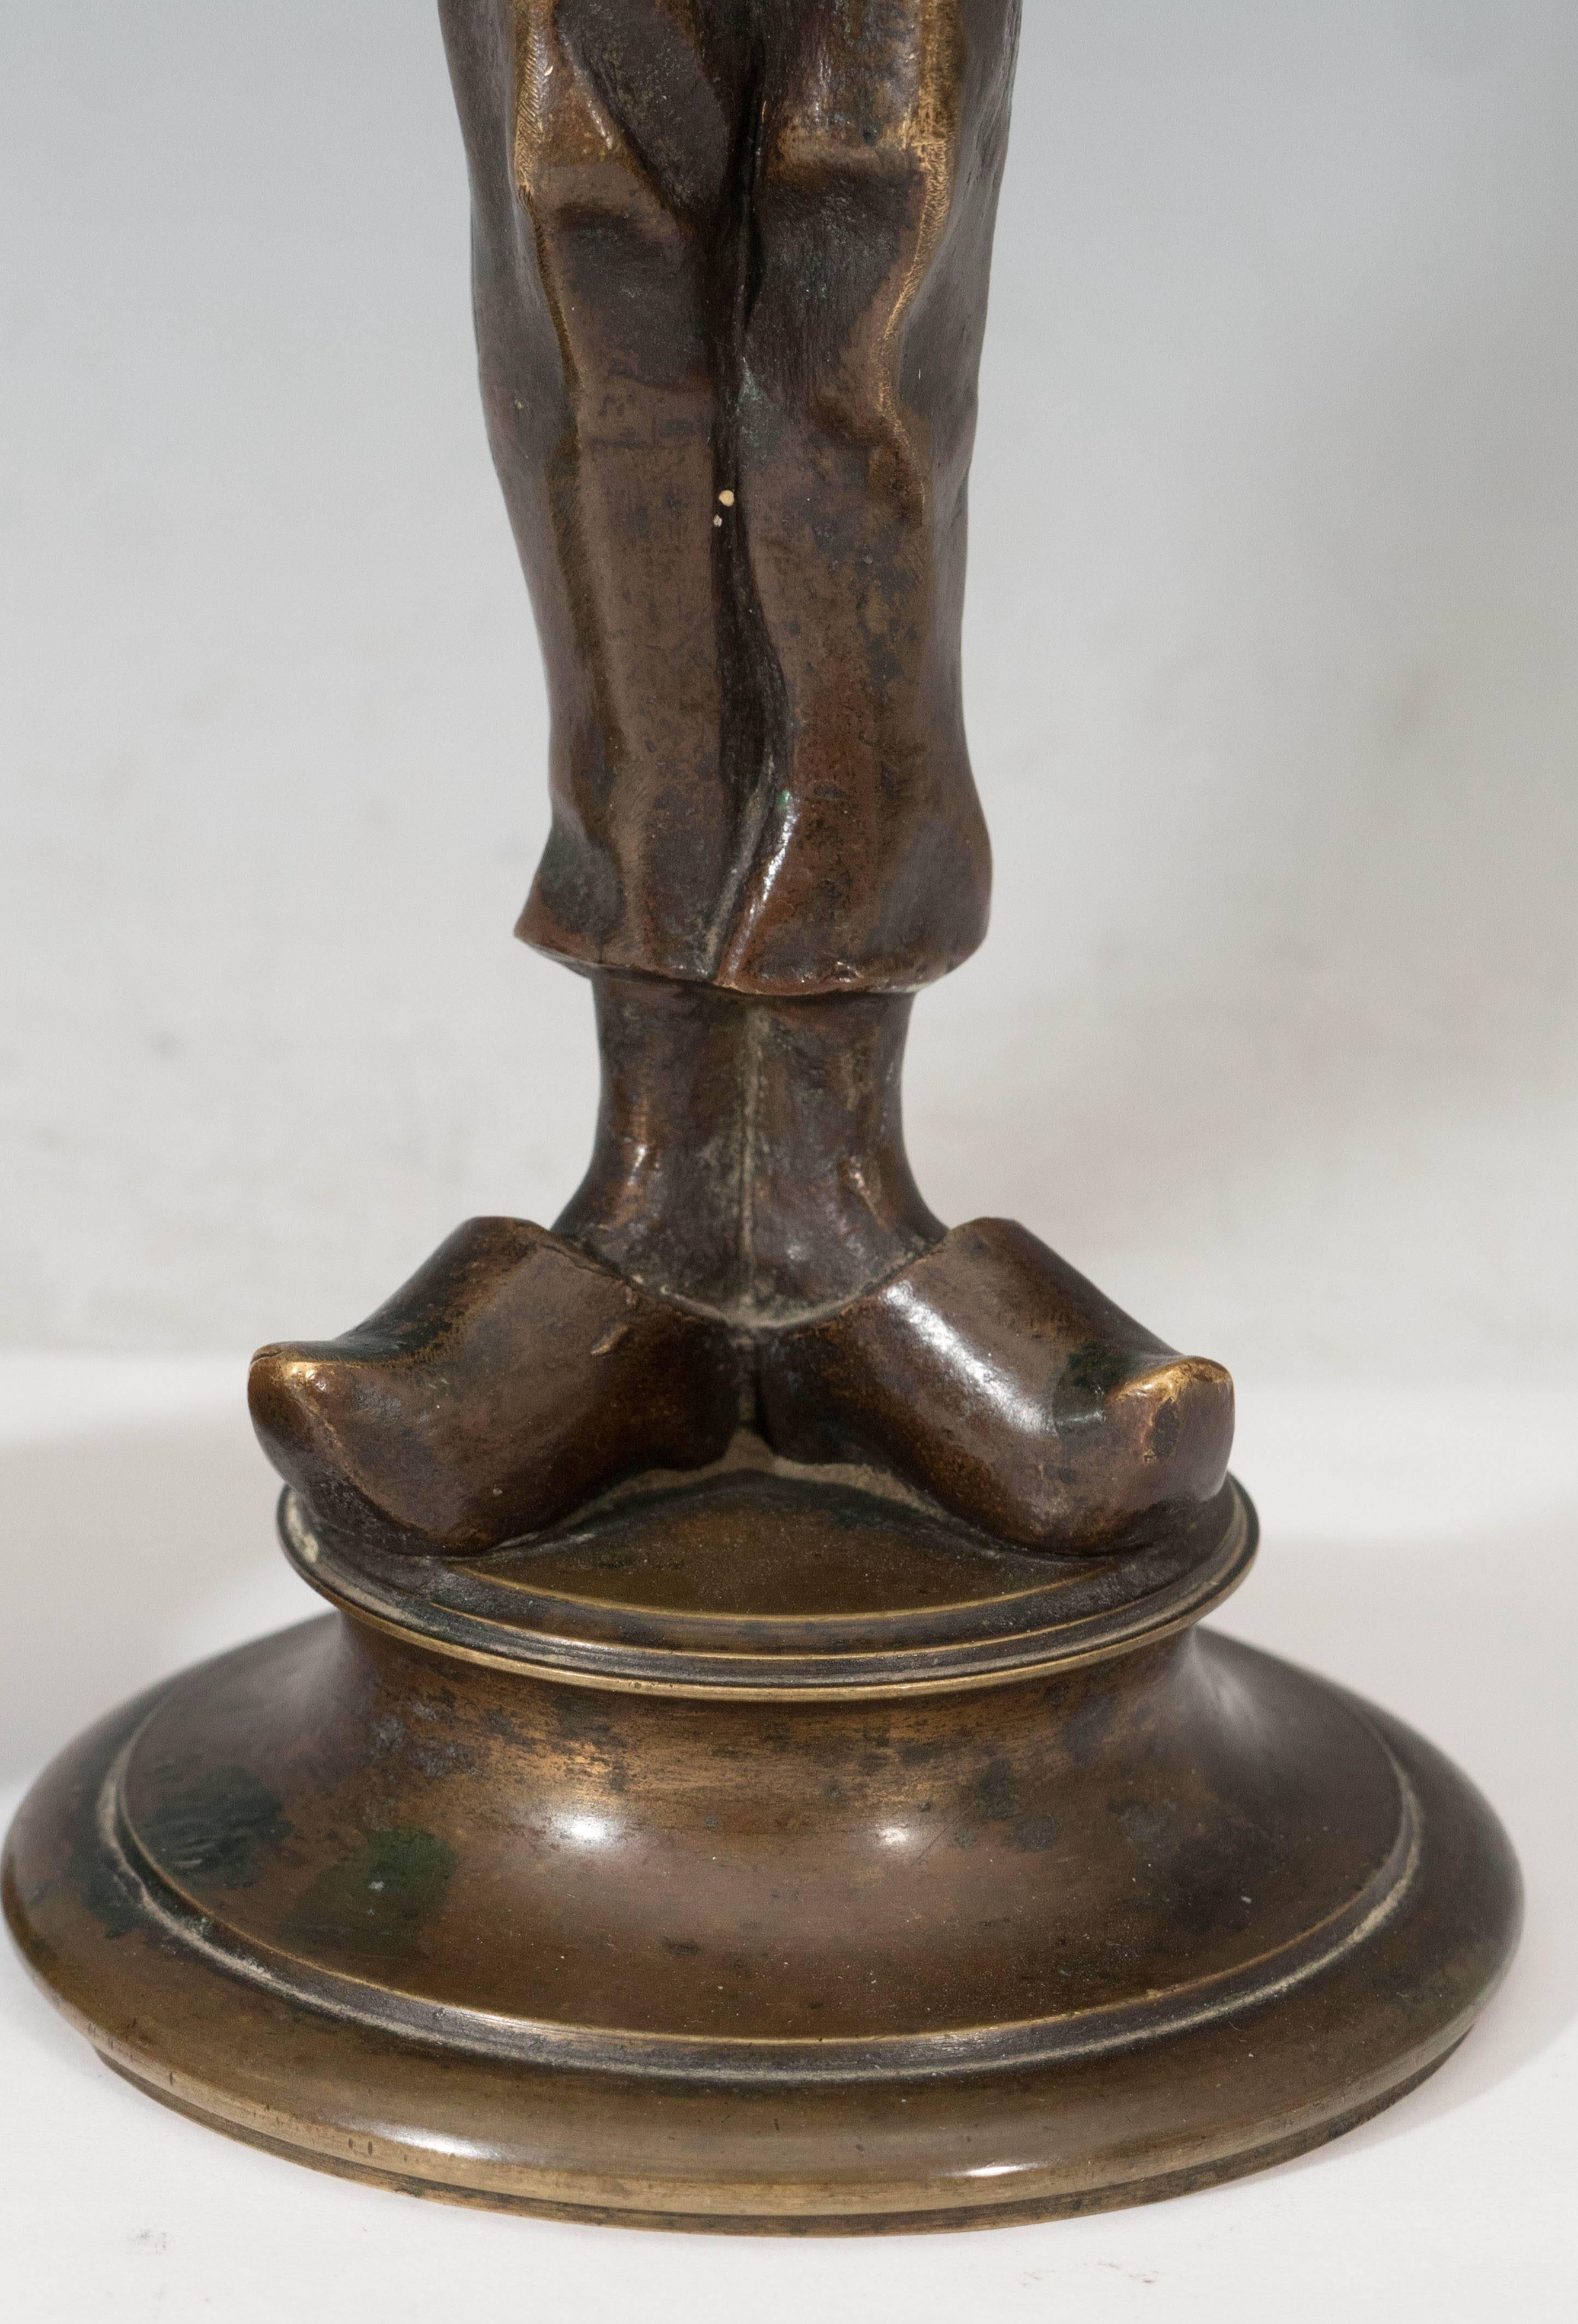 This unusual pair of bronze candlestick holders come designed as two comical soldiers, a gangly young man paired with a higher ranking older man with a long twisted beard. Each piece is in very good condition, with age appropriate patina to bronze.